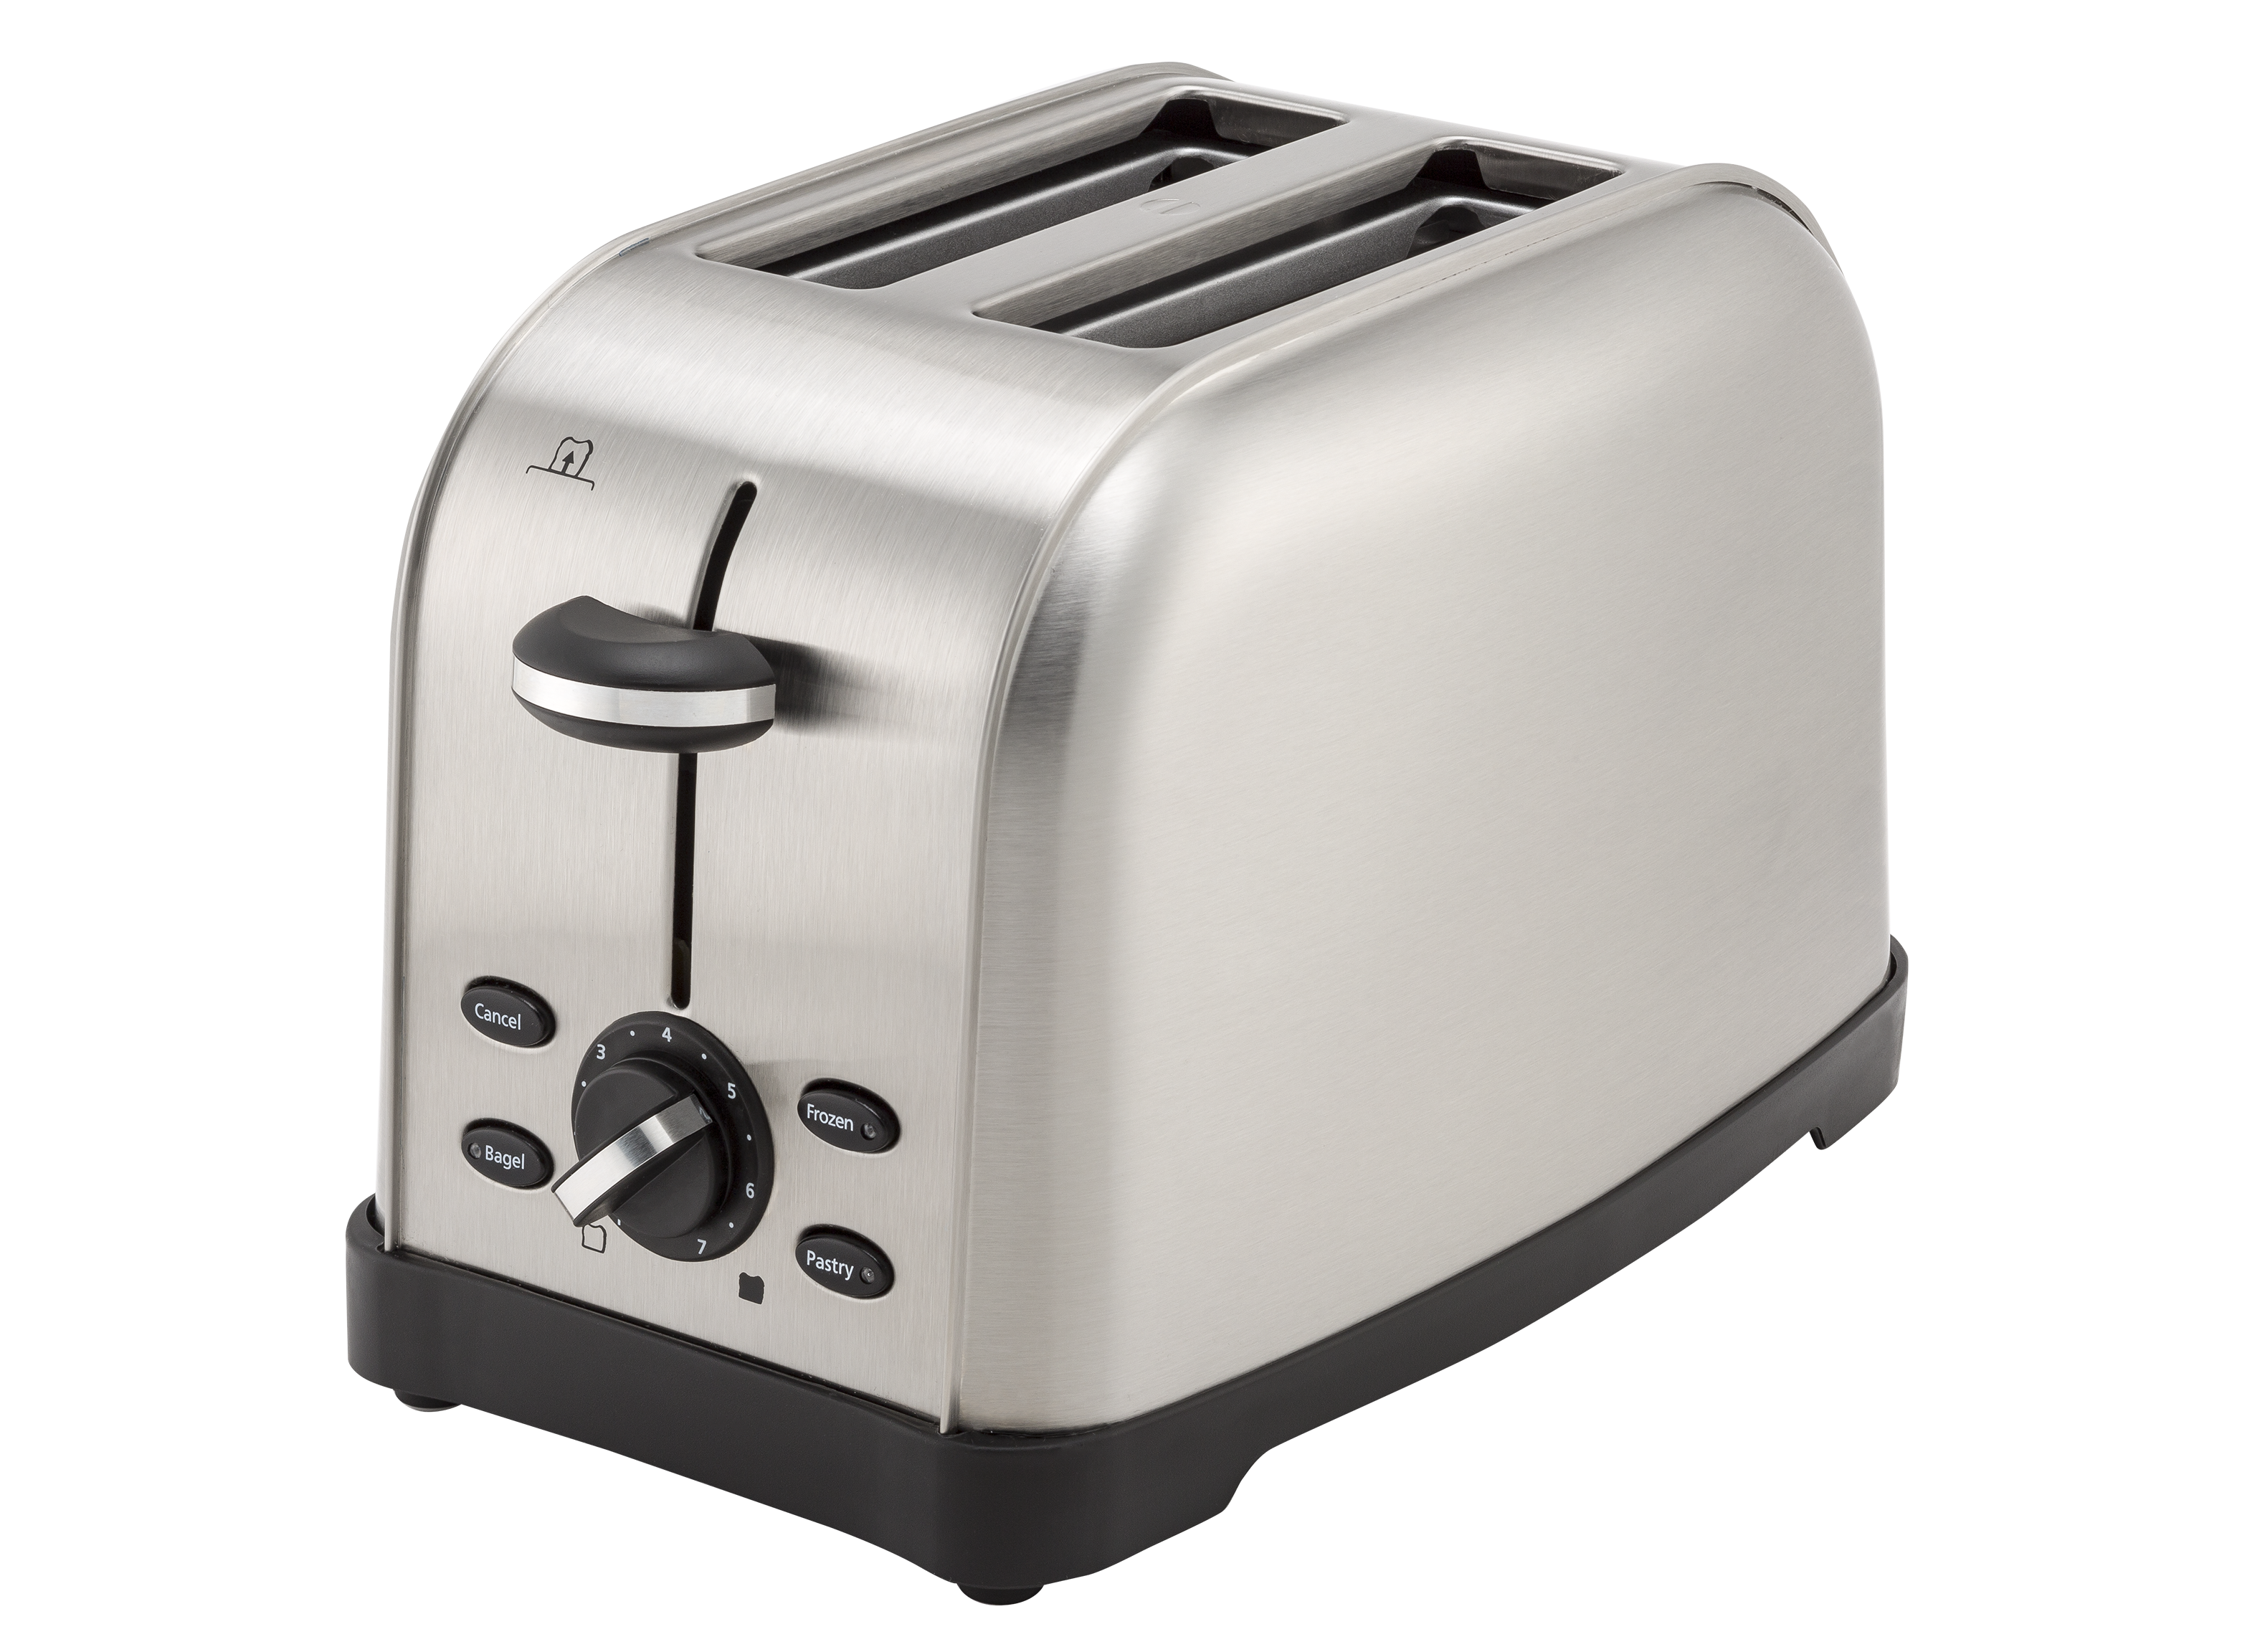  Oster 2 Slice Toaster, Brushed Stainless Steel